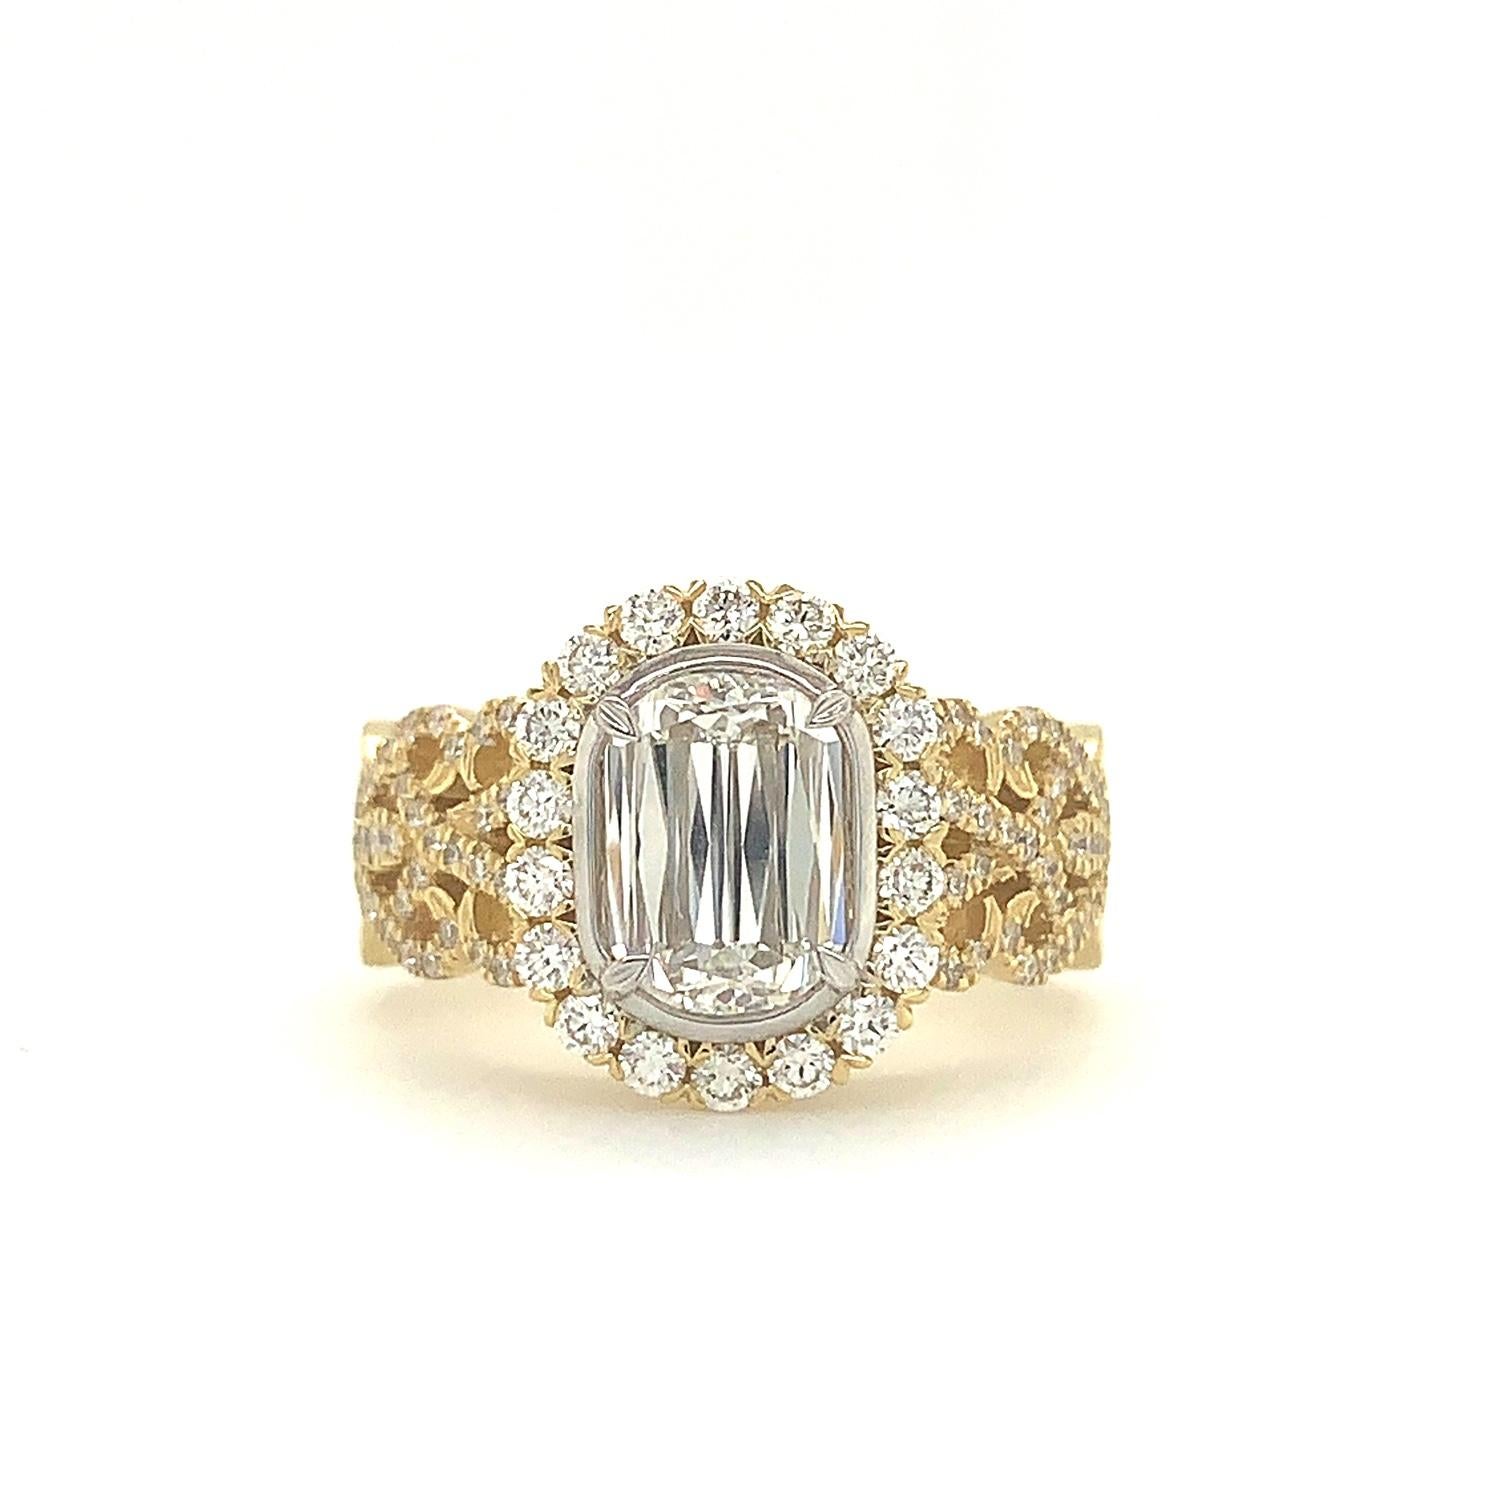 Christopher Designs Crisscut® L'amour Diamond Engagement Ring. This Beautiful Halo Design features a Fillagree band, paved in Diamonds. 
Set in 18k Yellow Gold and White Gold for the Center Diamond.
Christopher Designs Crisscut® engagement ring with